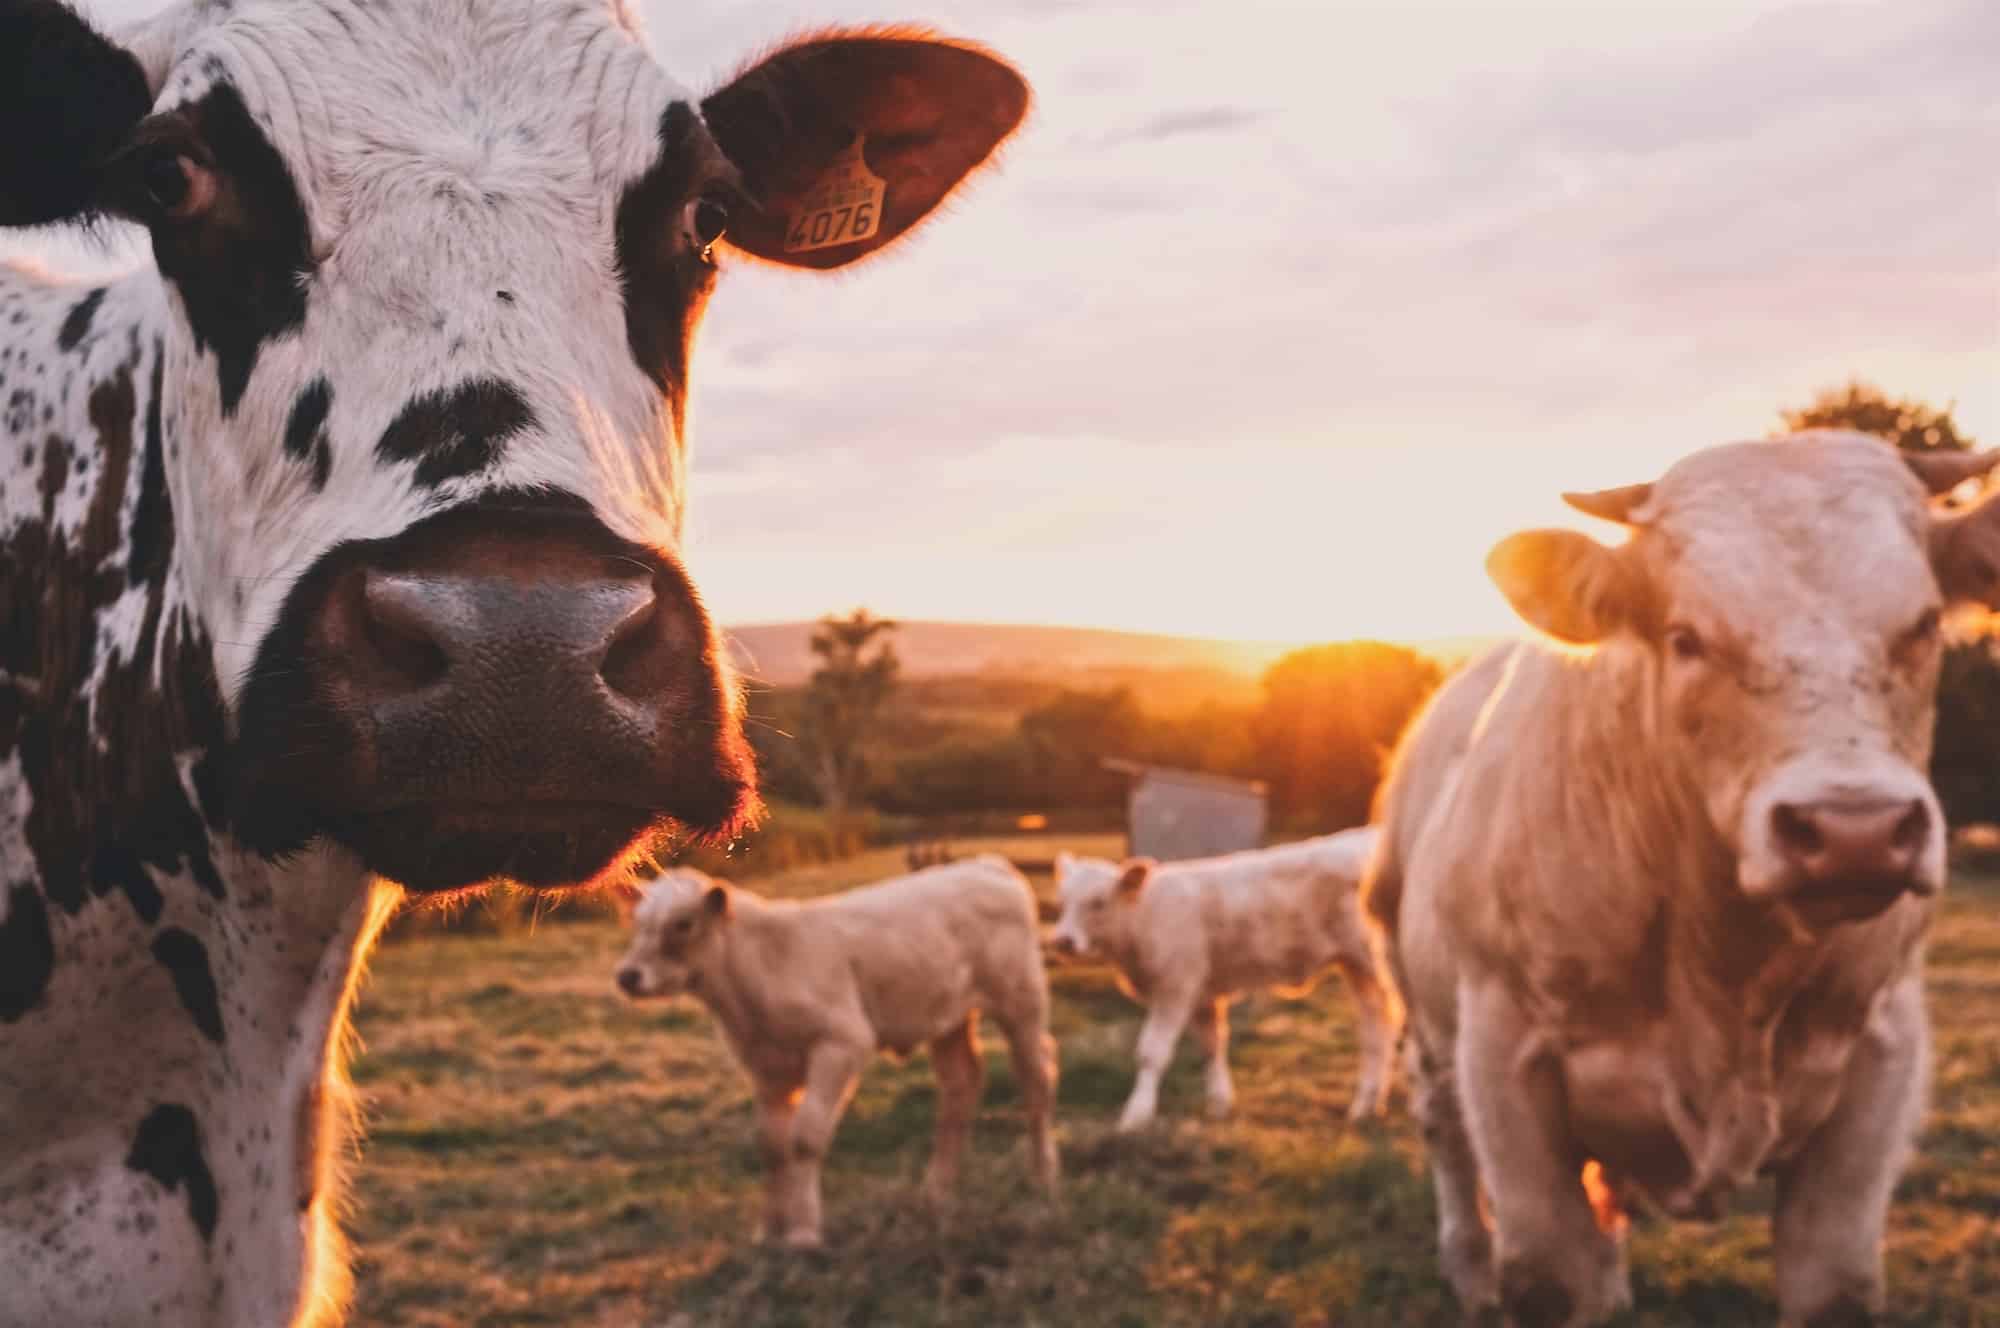 HiP Paris Blog rounds up the top events in Paris this February like the Agricultural Fair, where these cows walking in a field at sunset will be seen.